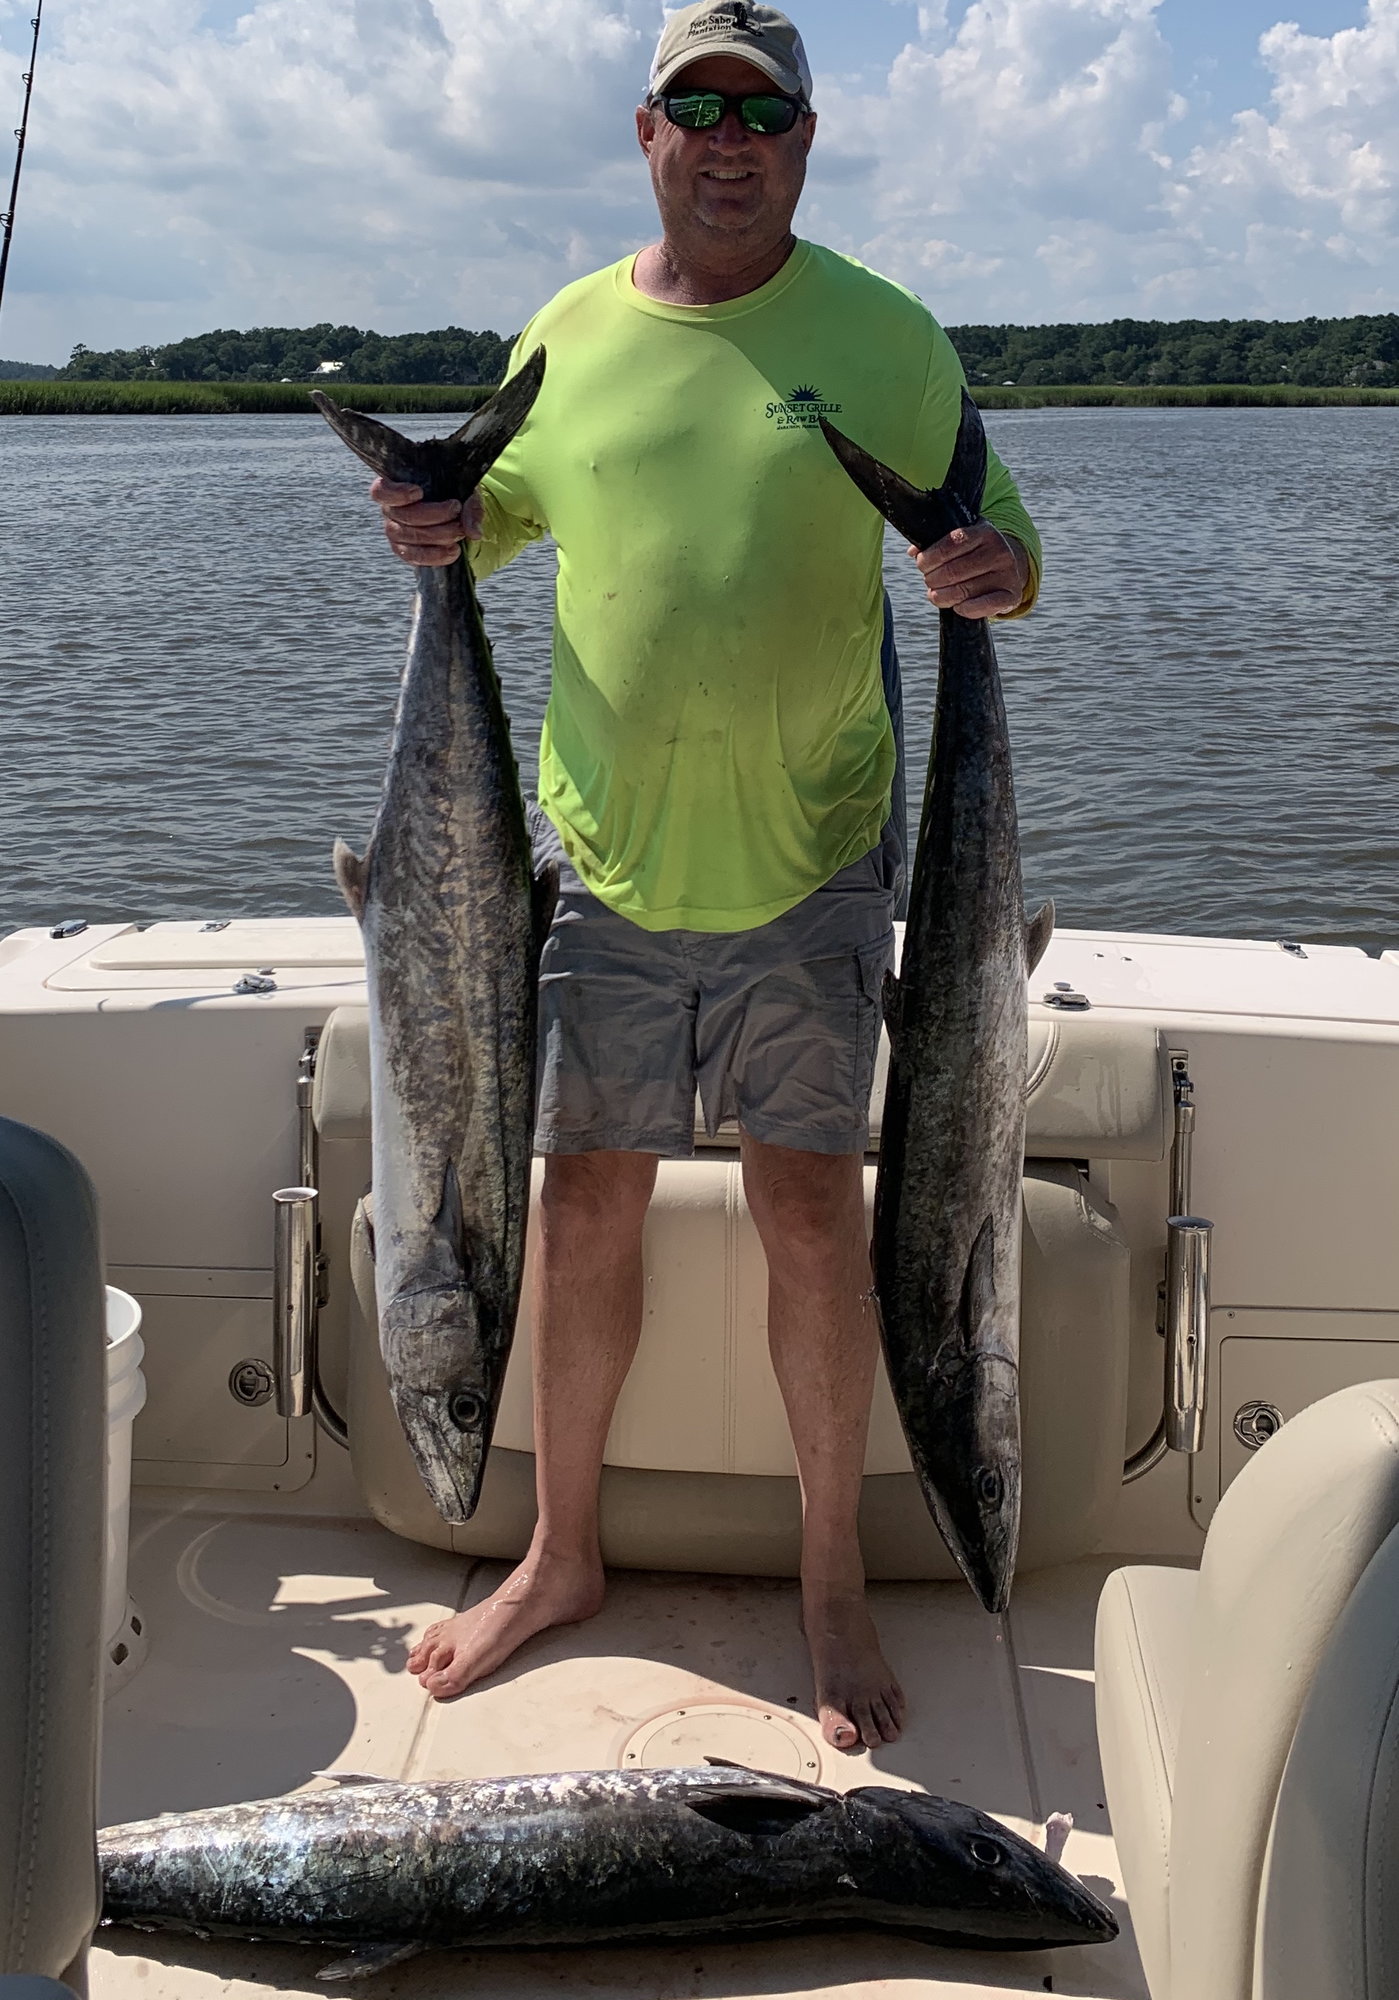 King mackerel - Page 2 - The Hull Truth - Boating and Fishing Forum